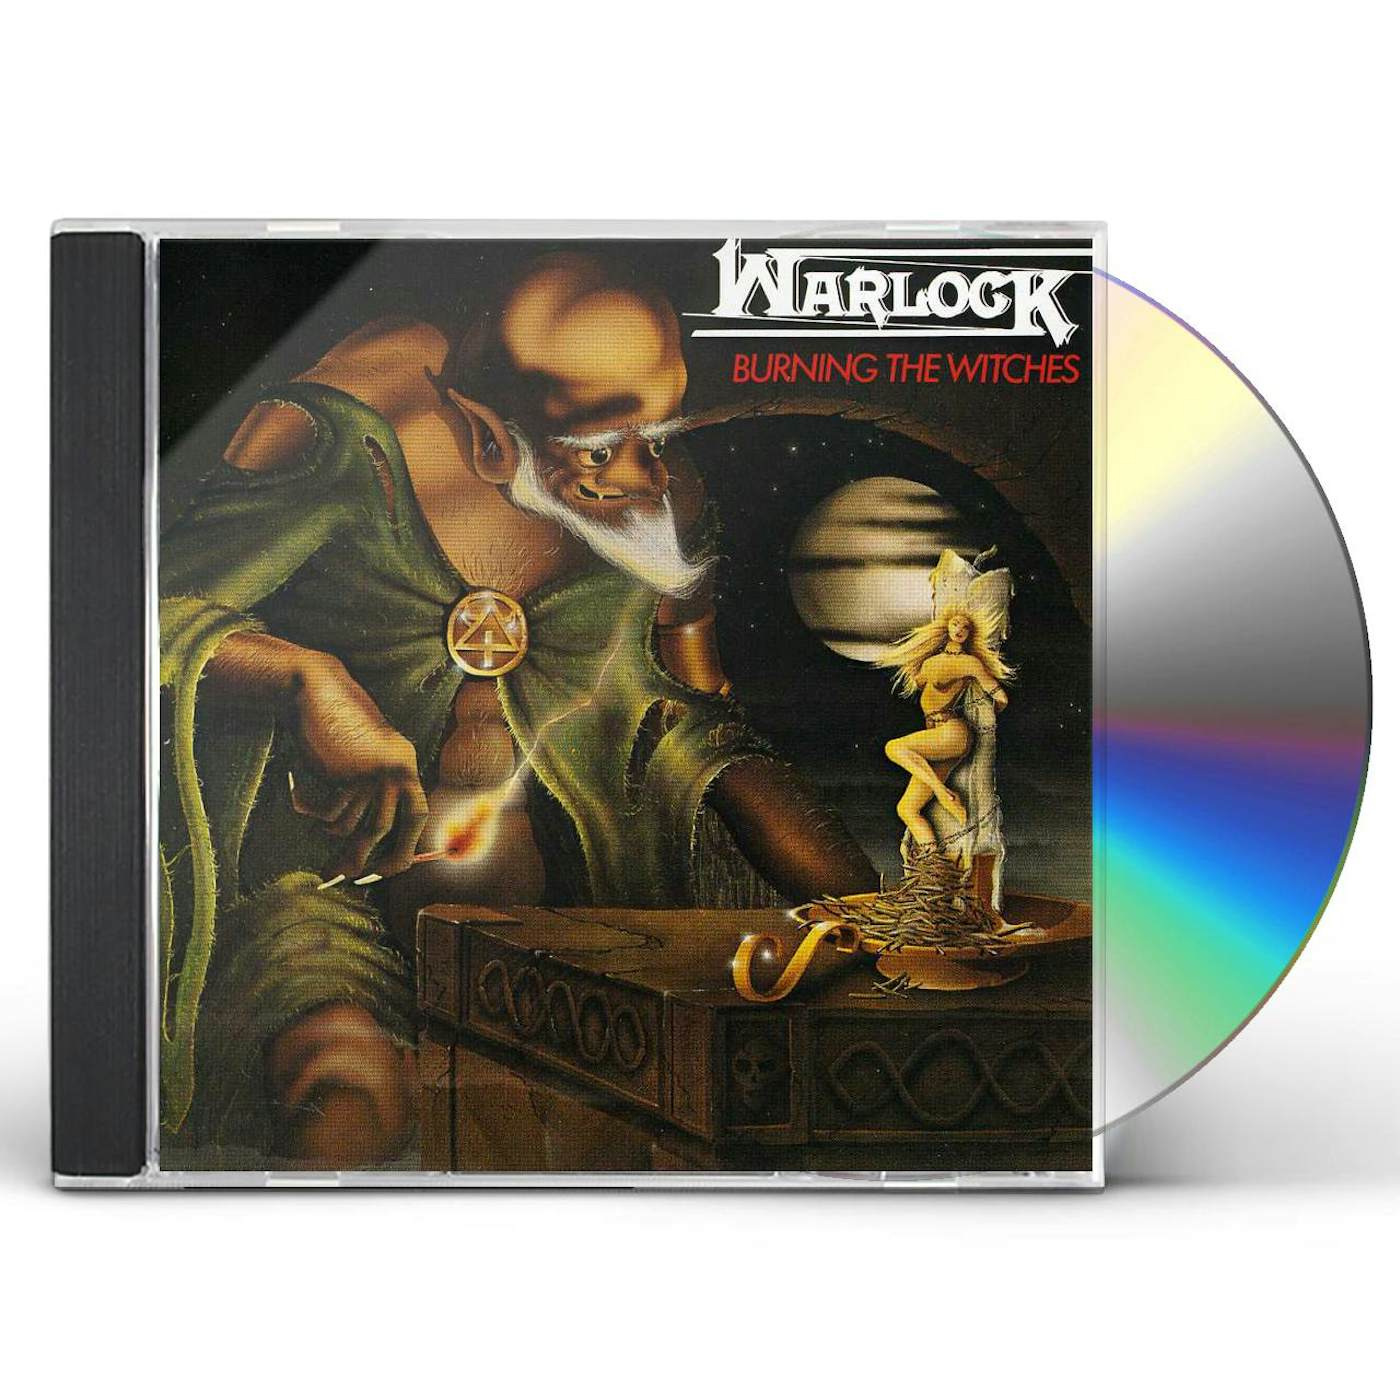 Warlock BURNING THE WITCHES CD